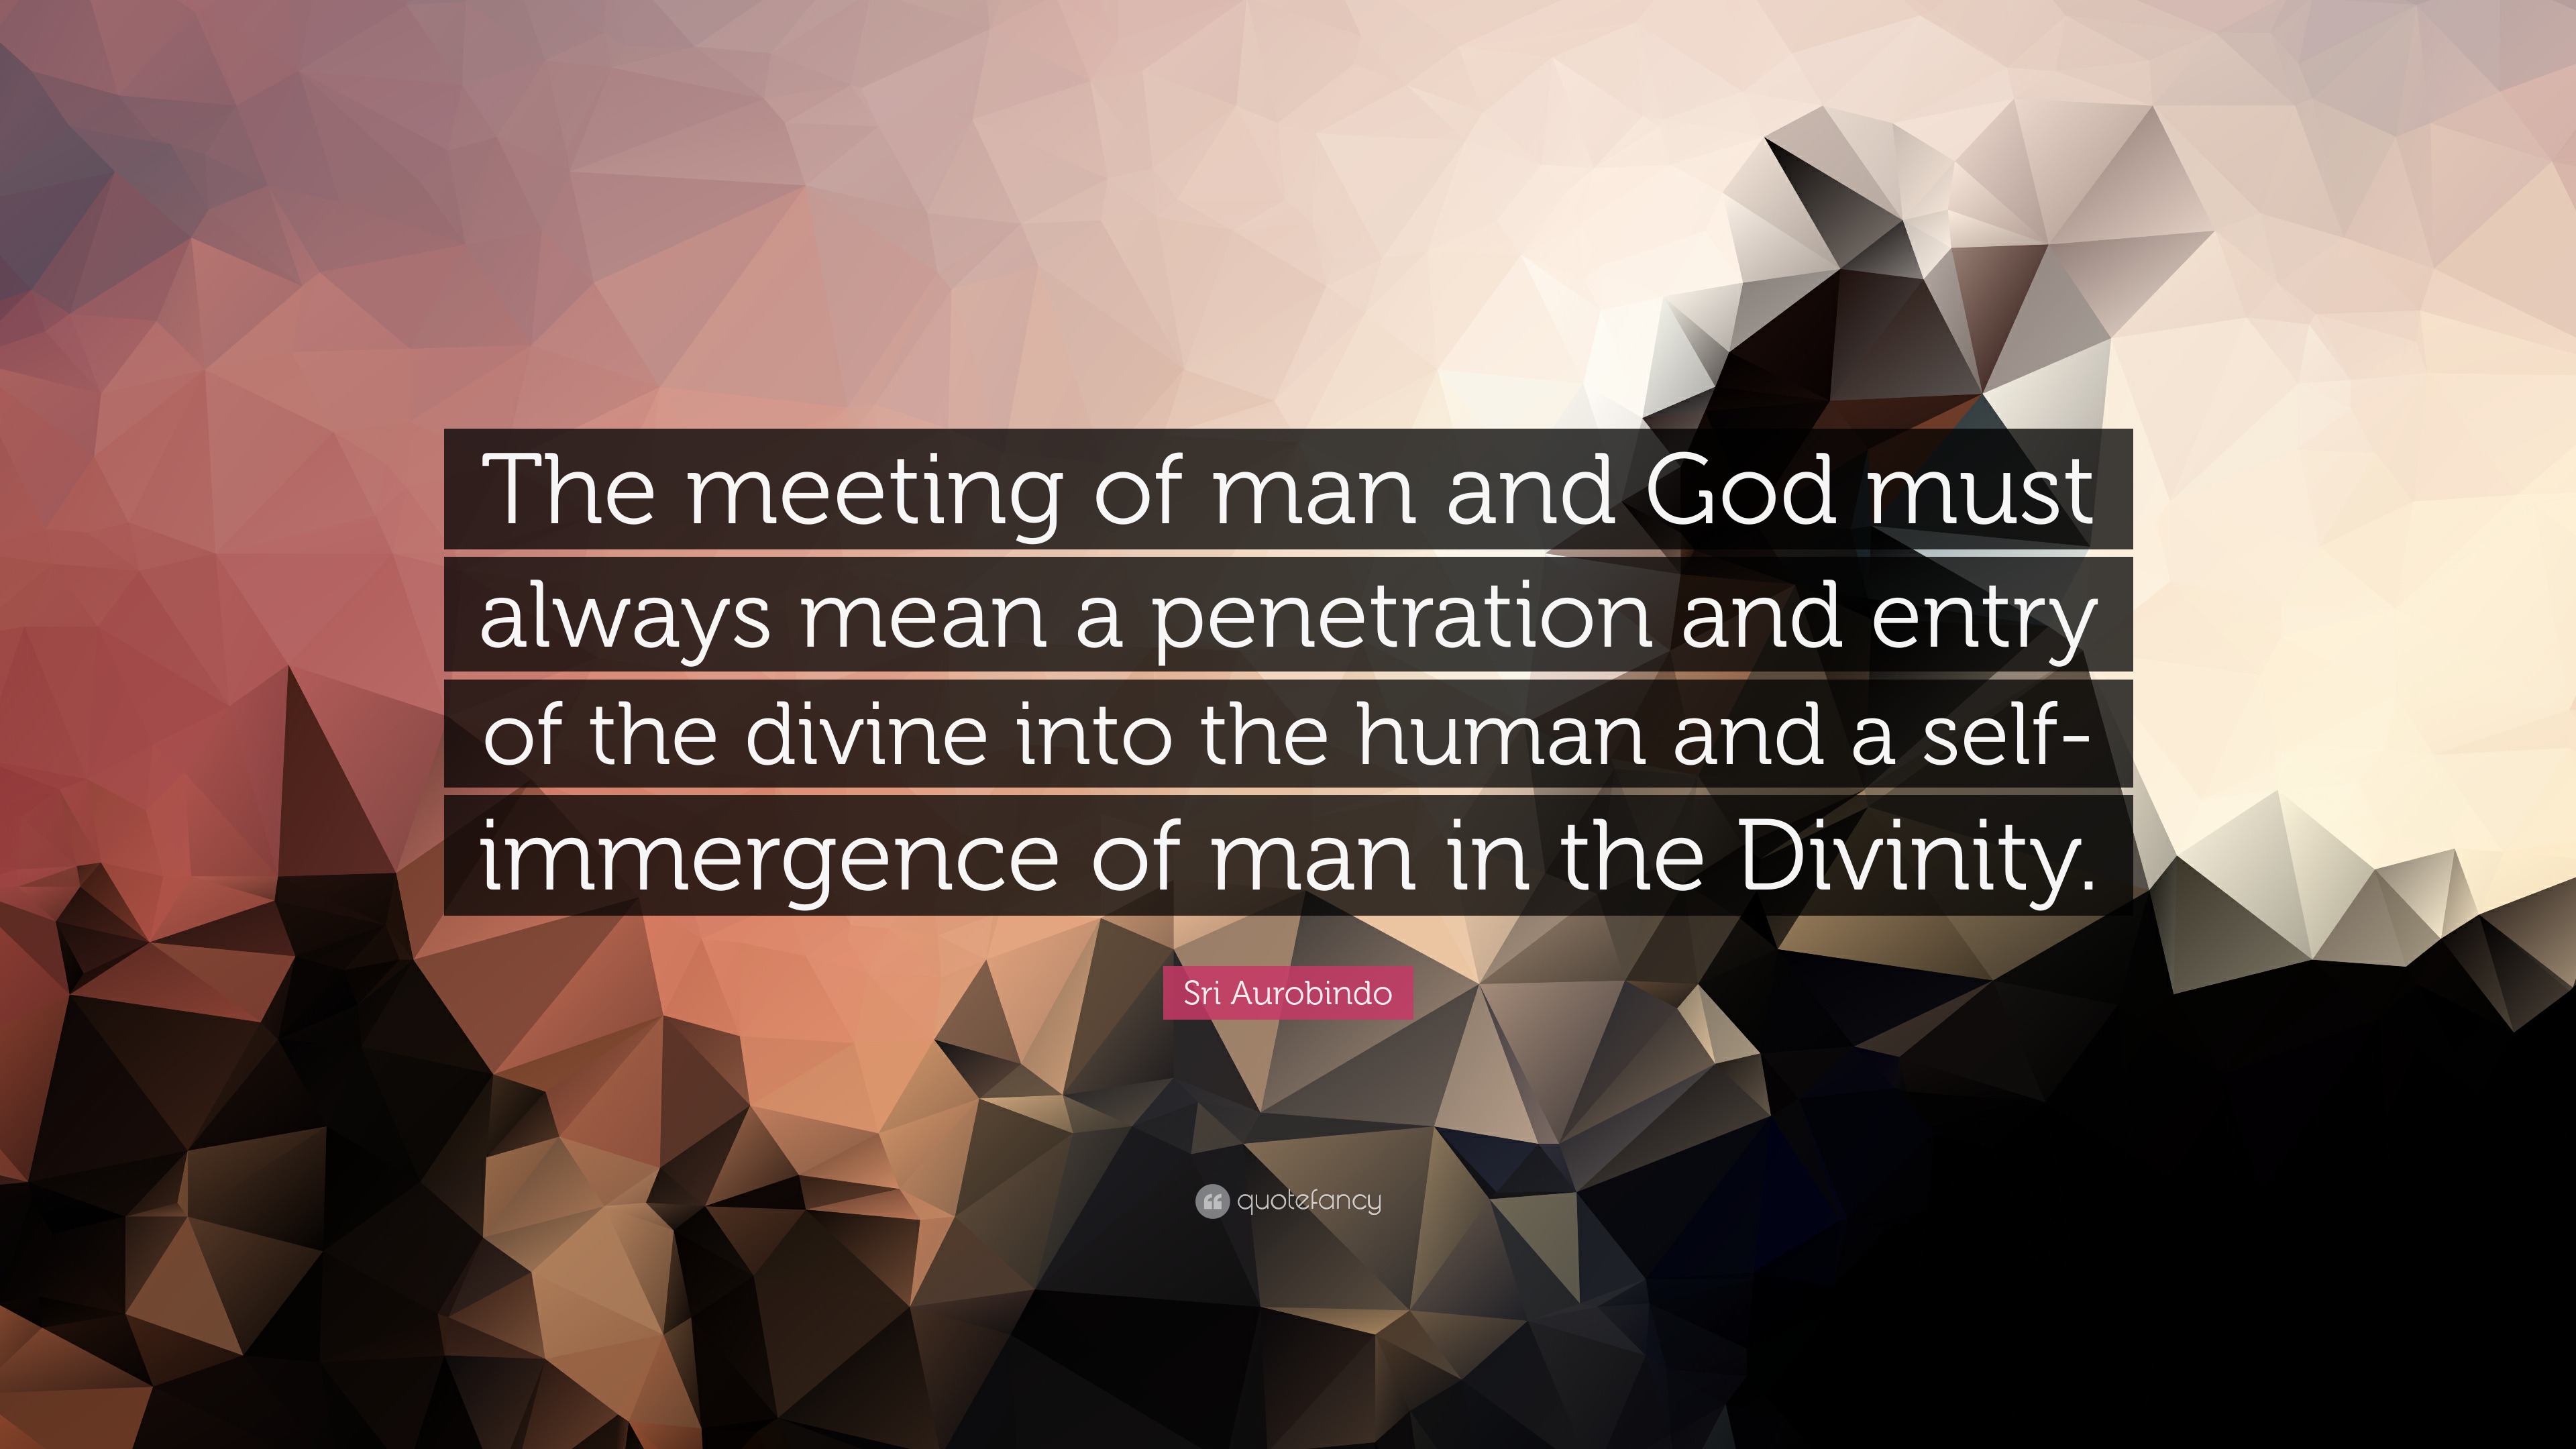 Sri Aurobindo Quote: “The meeting of man and God must always mean a  penetration and entry of the divine into the human and a self-immergence  o...”